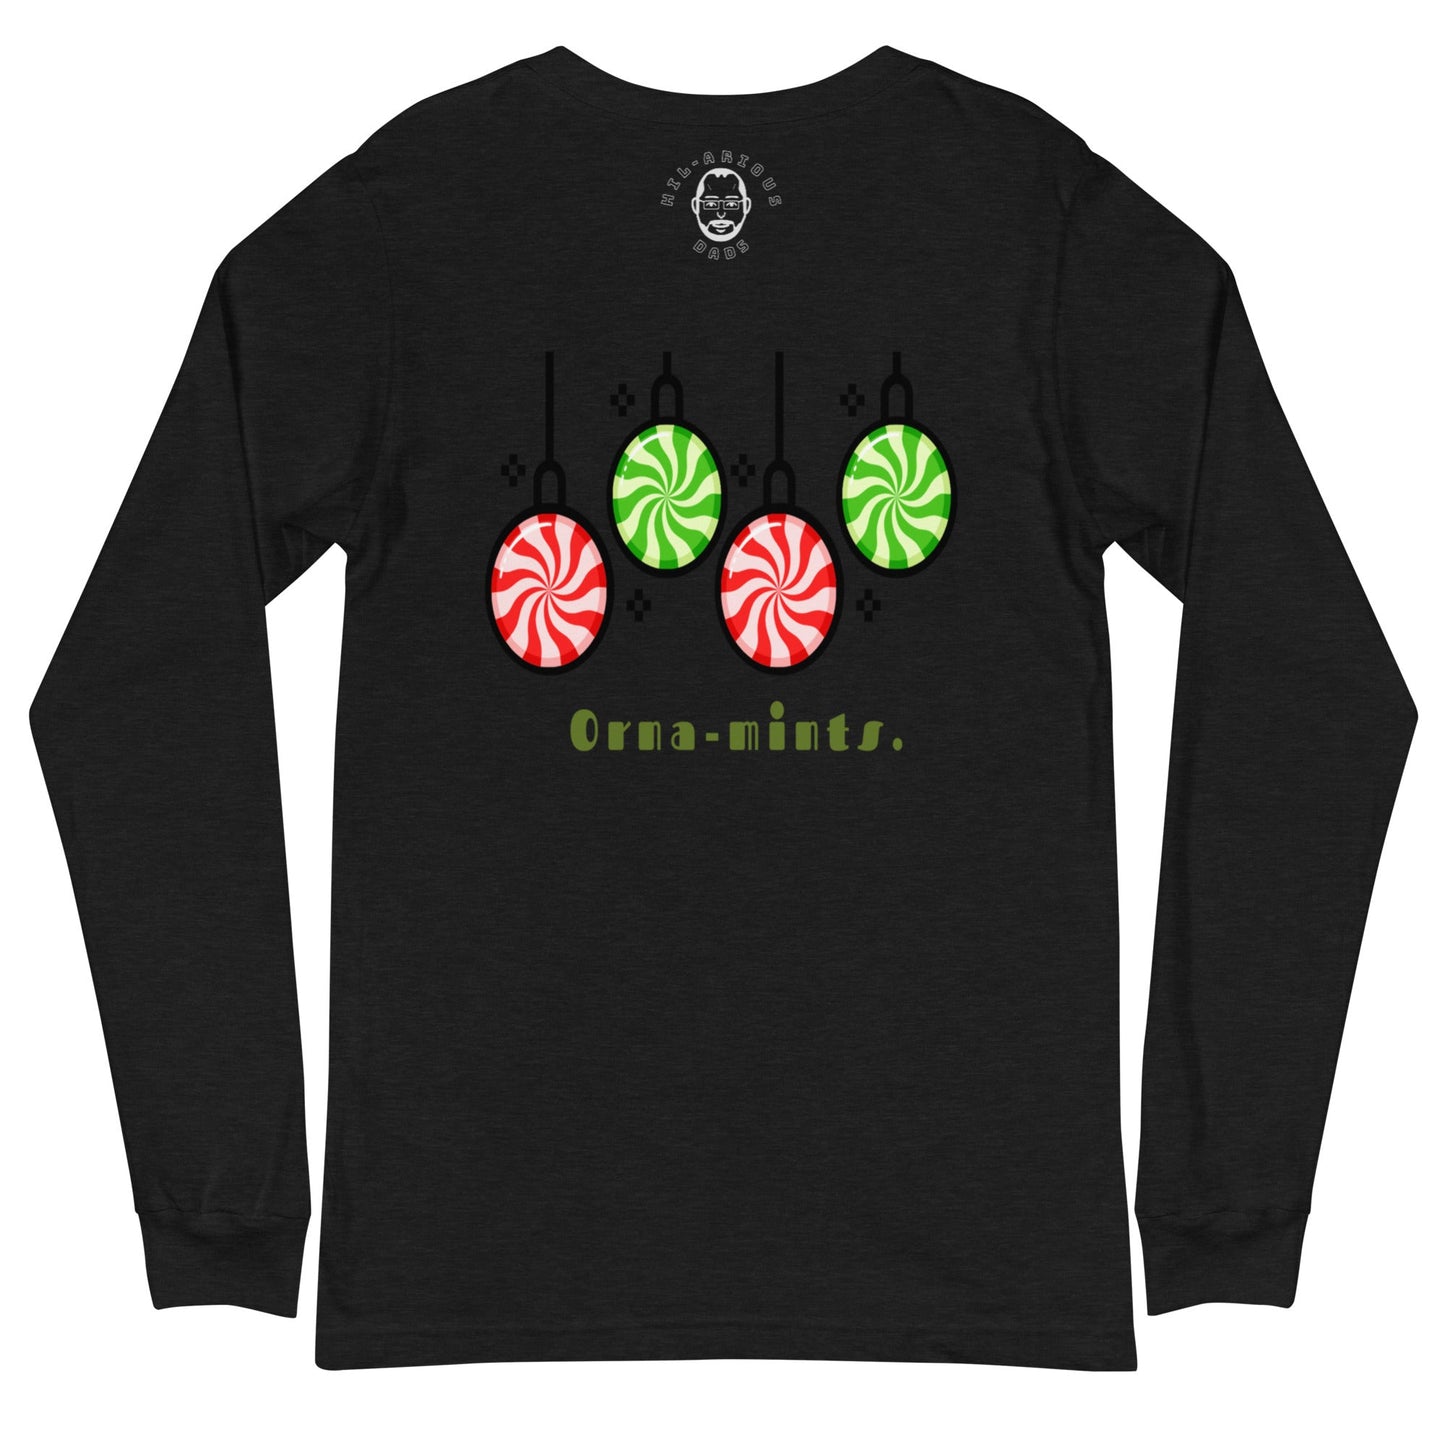 What’s a Christmas tree’s favorite candy?-Long Sleeve Tee - Hil-arious Dads